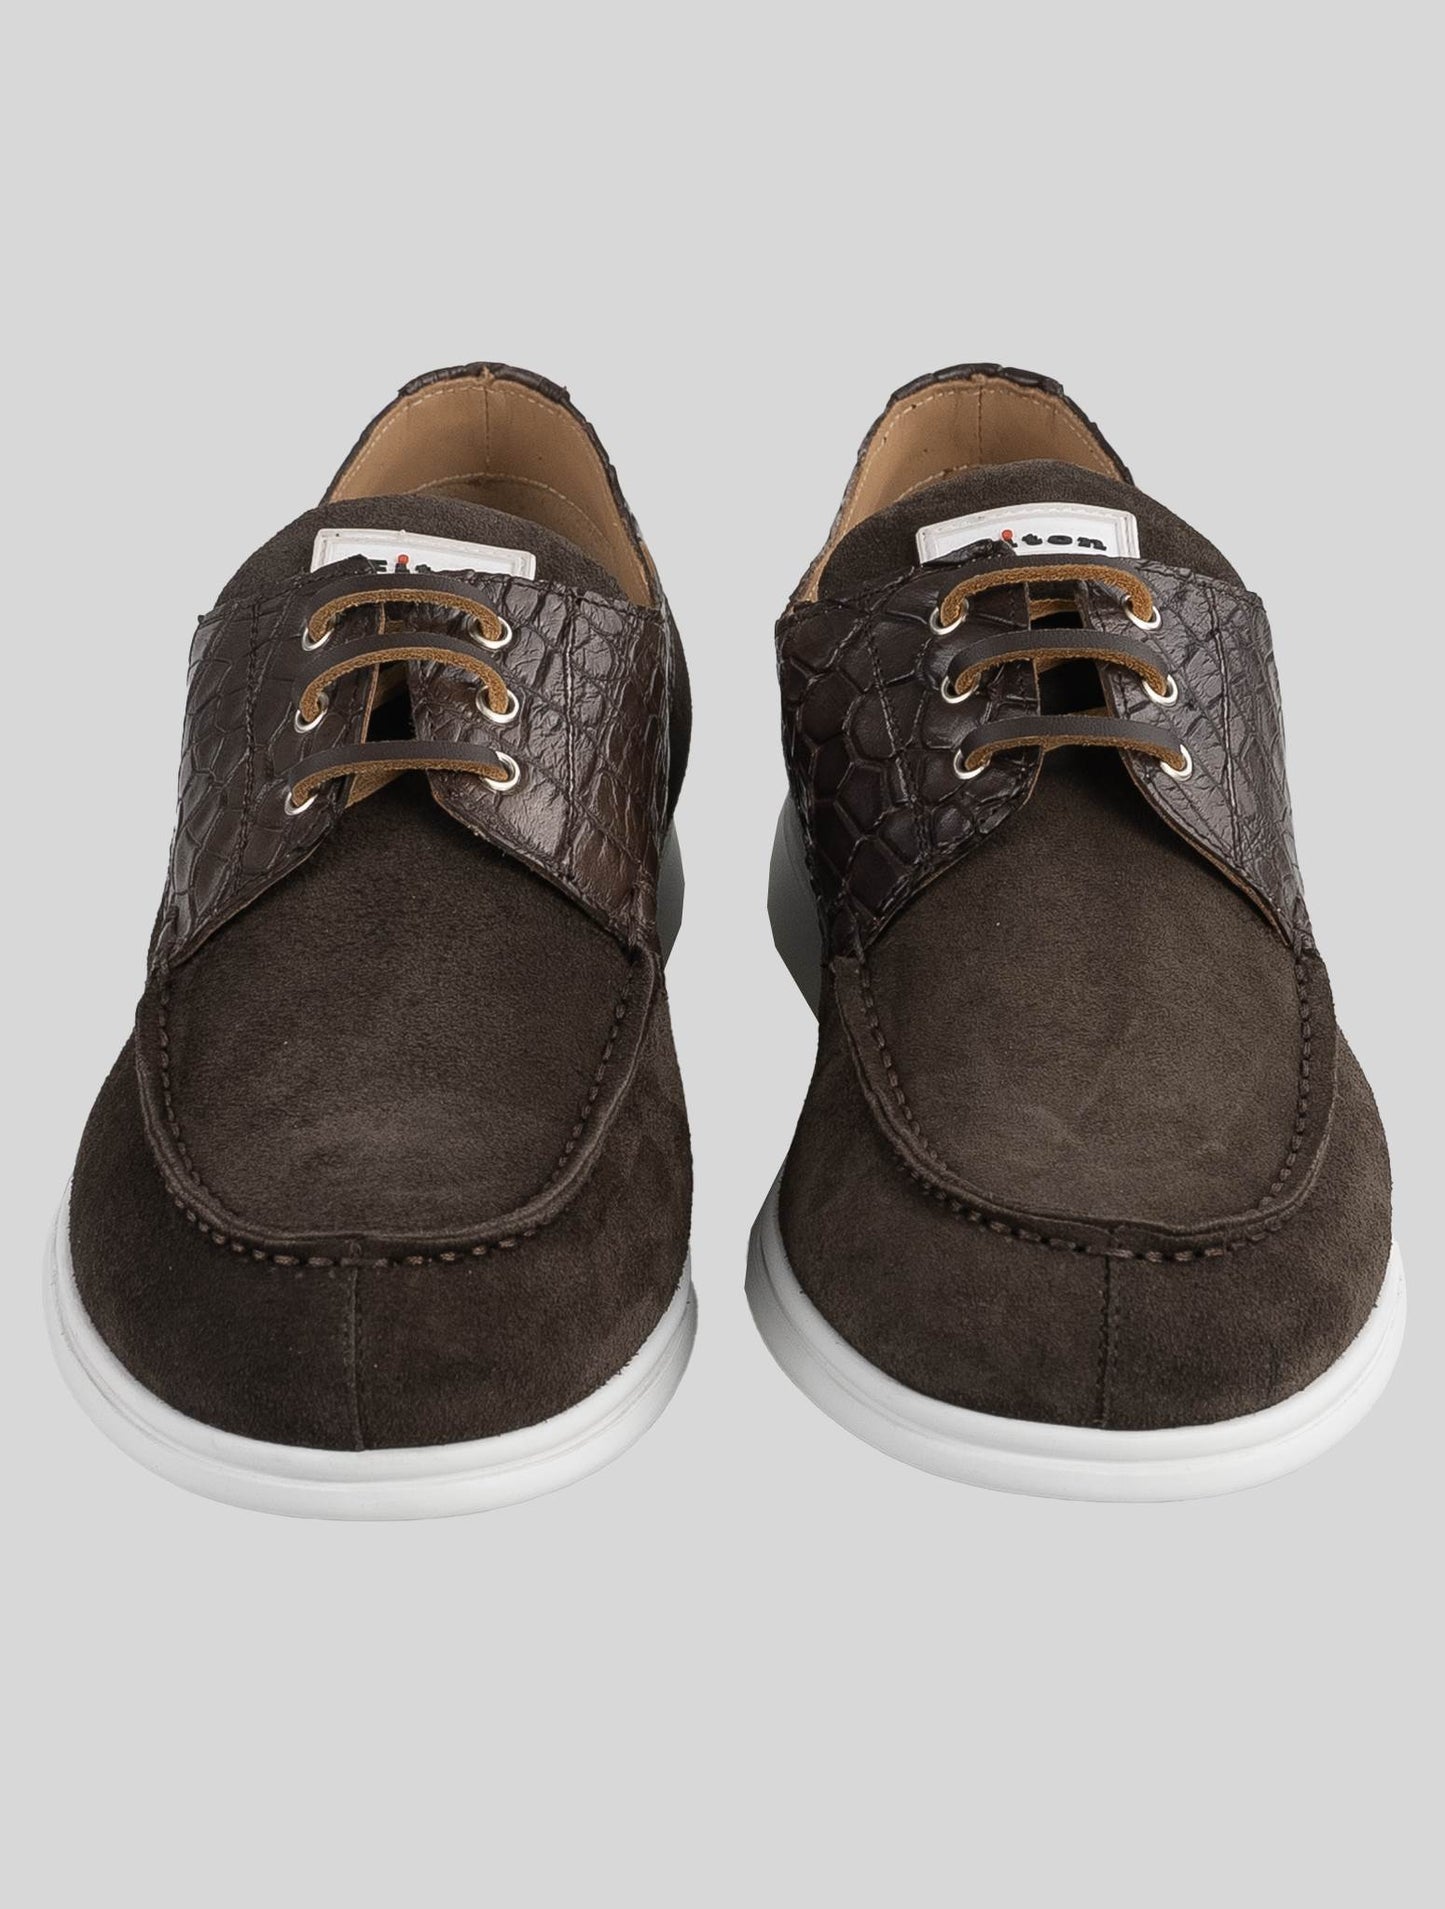 Kiton Brown Leather Suede Leather Crocodile Sneakers Shoes